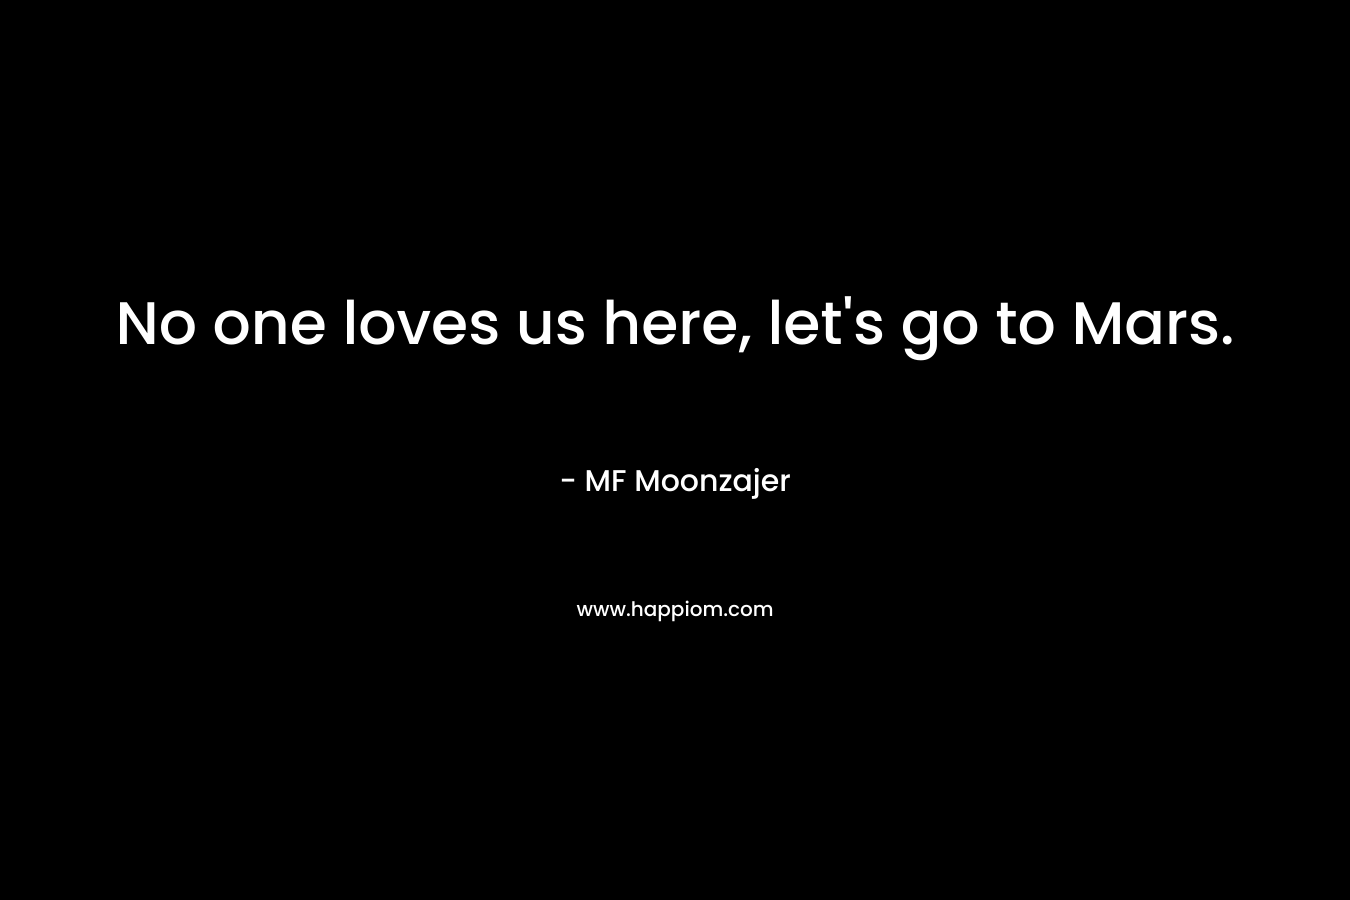 No one loves us here, let’s go to Mars. – MF Moonzajer